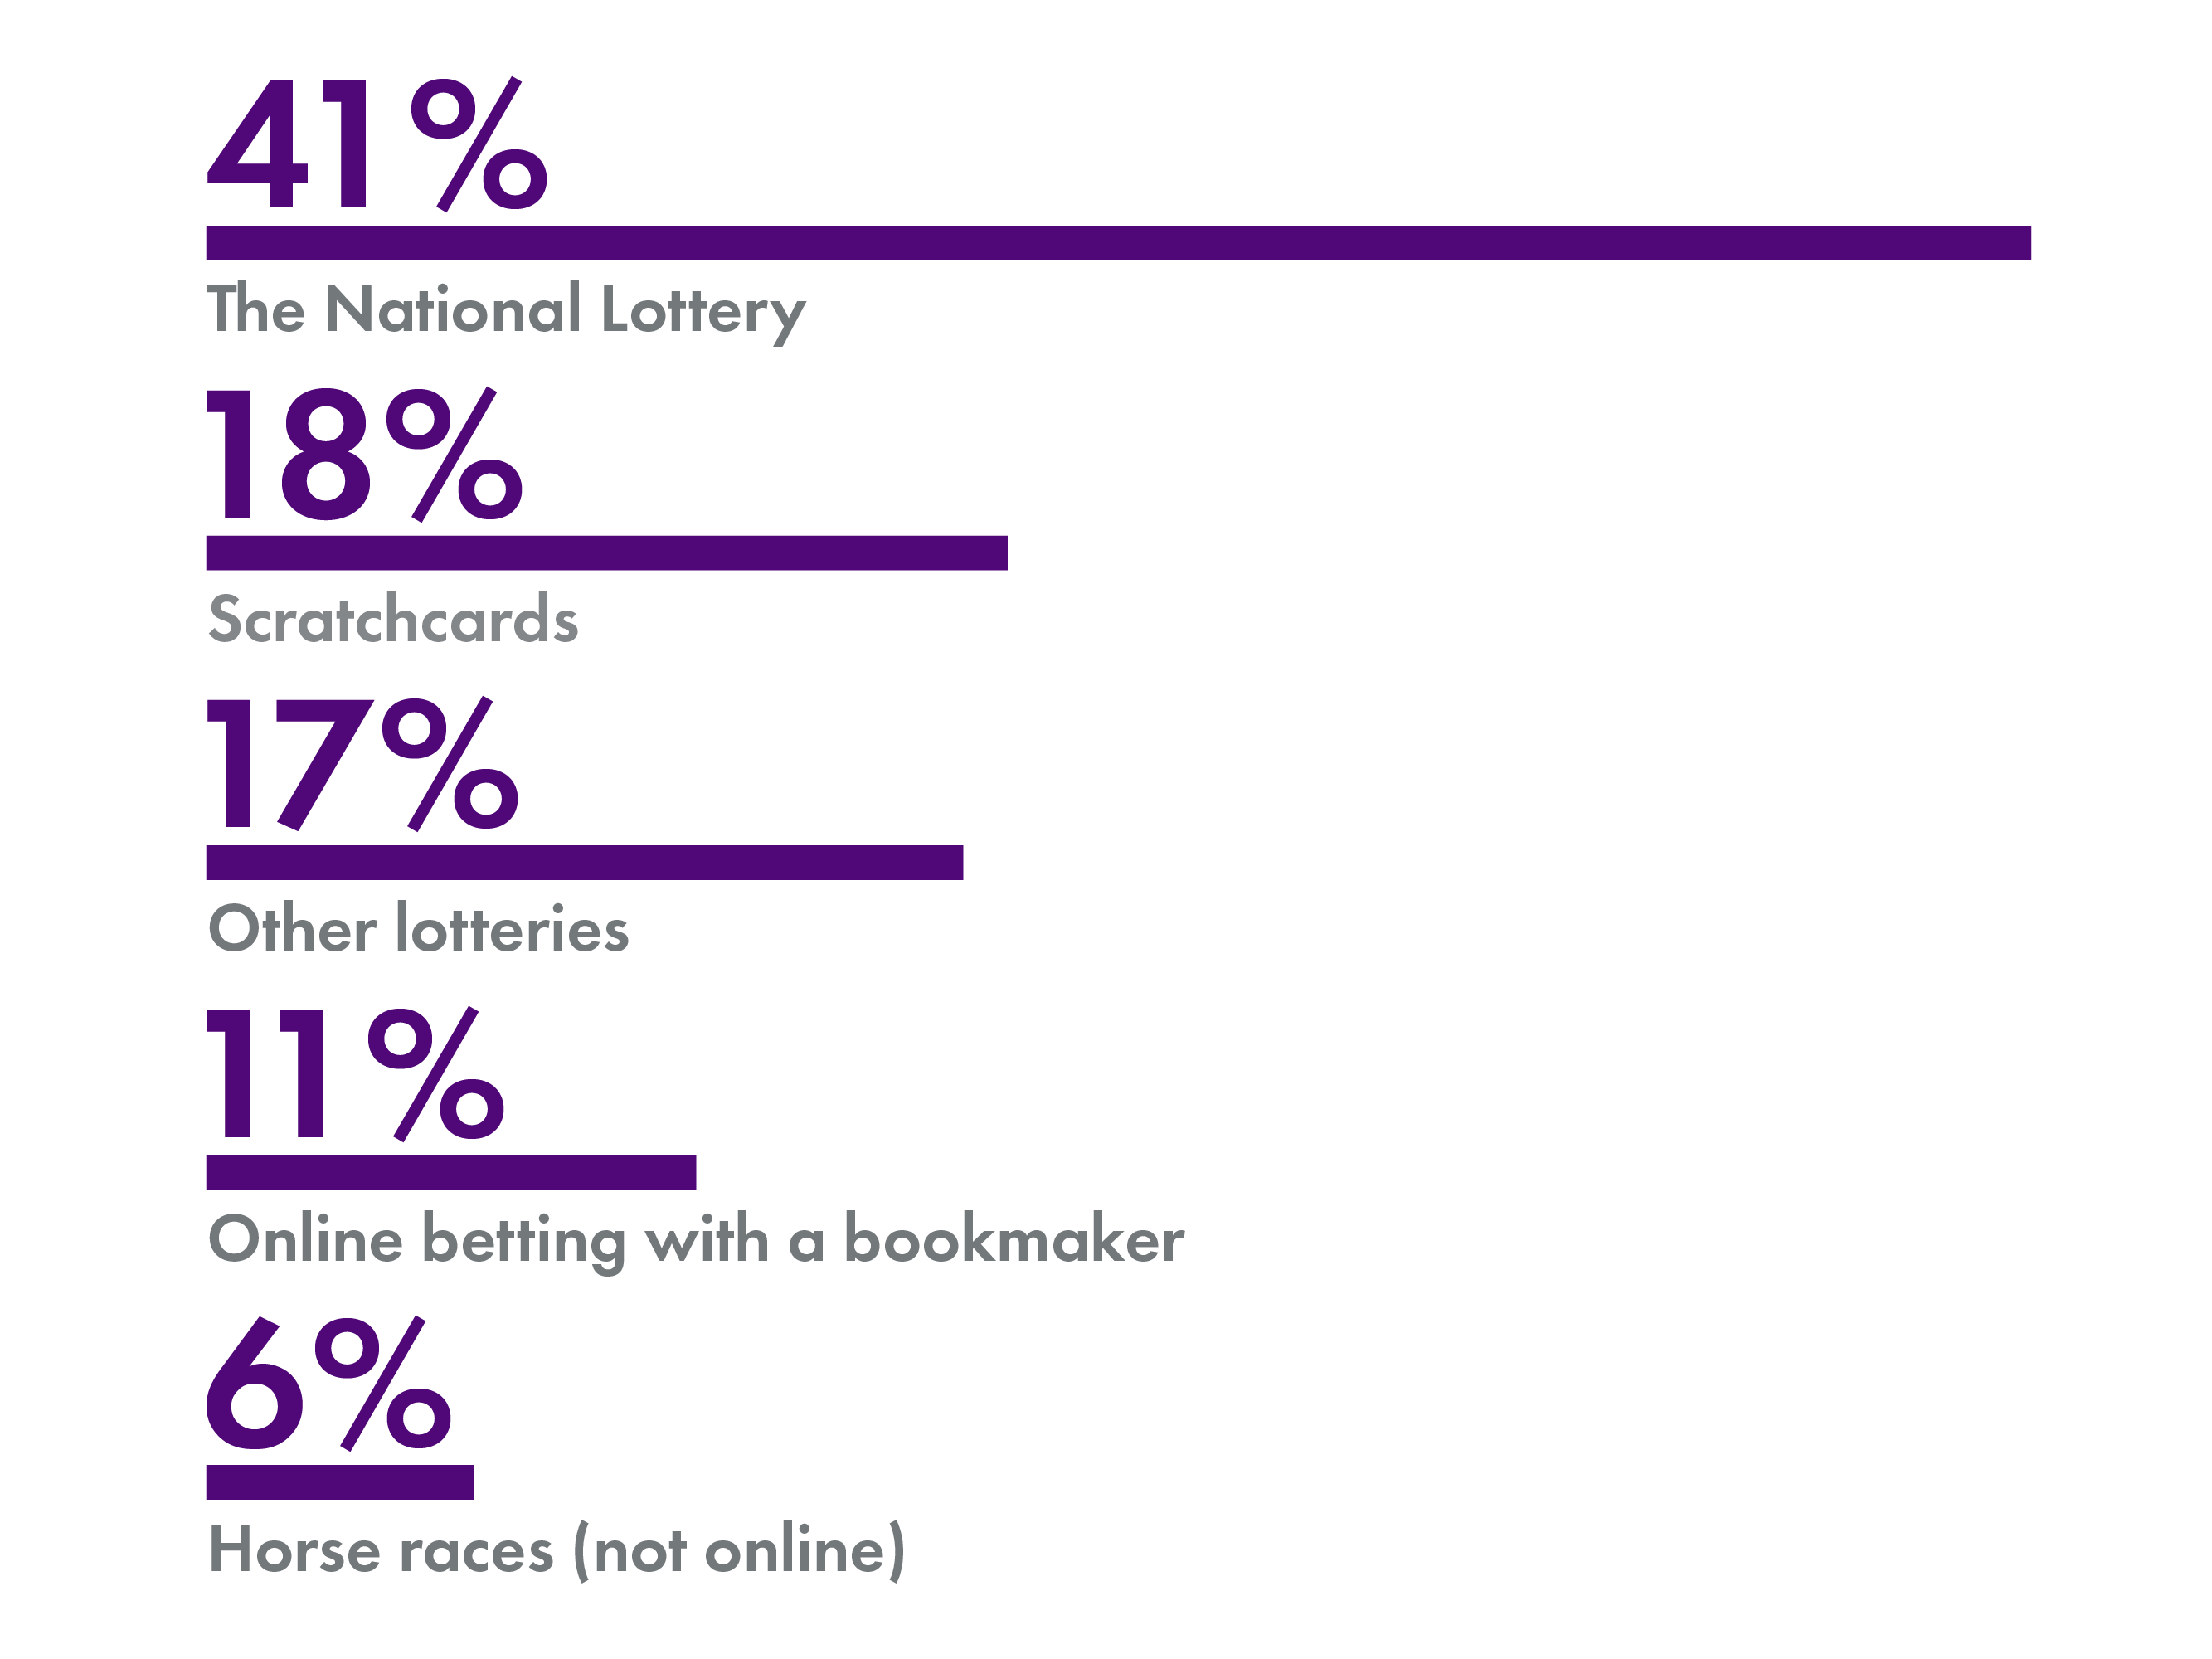 Bar chart showing the top five gambling activities in Scotland, with the National lottery most popular, with 41% participation, followed by scratchcards (18%), other lotteries (17%), online betting (11%) and horse races (6%).